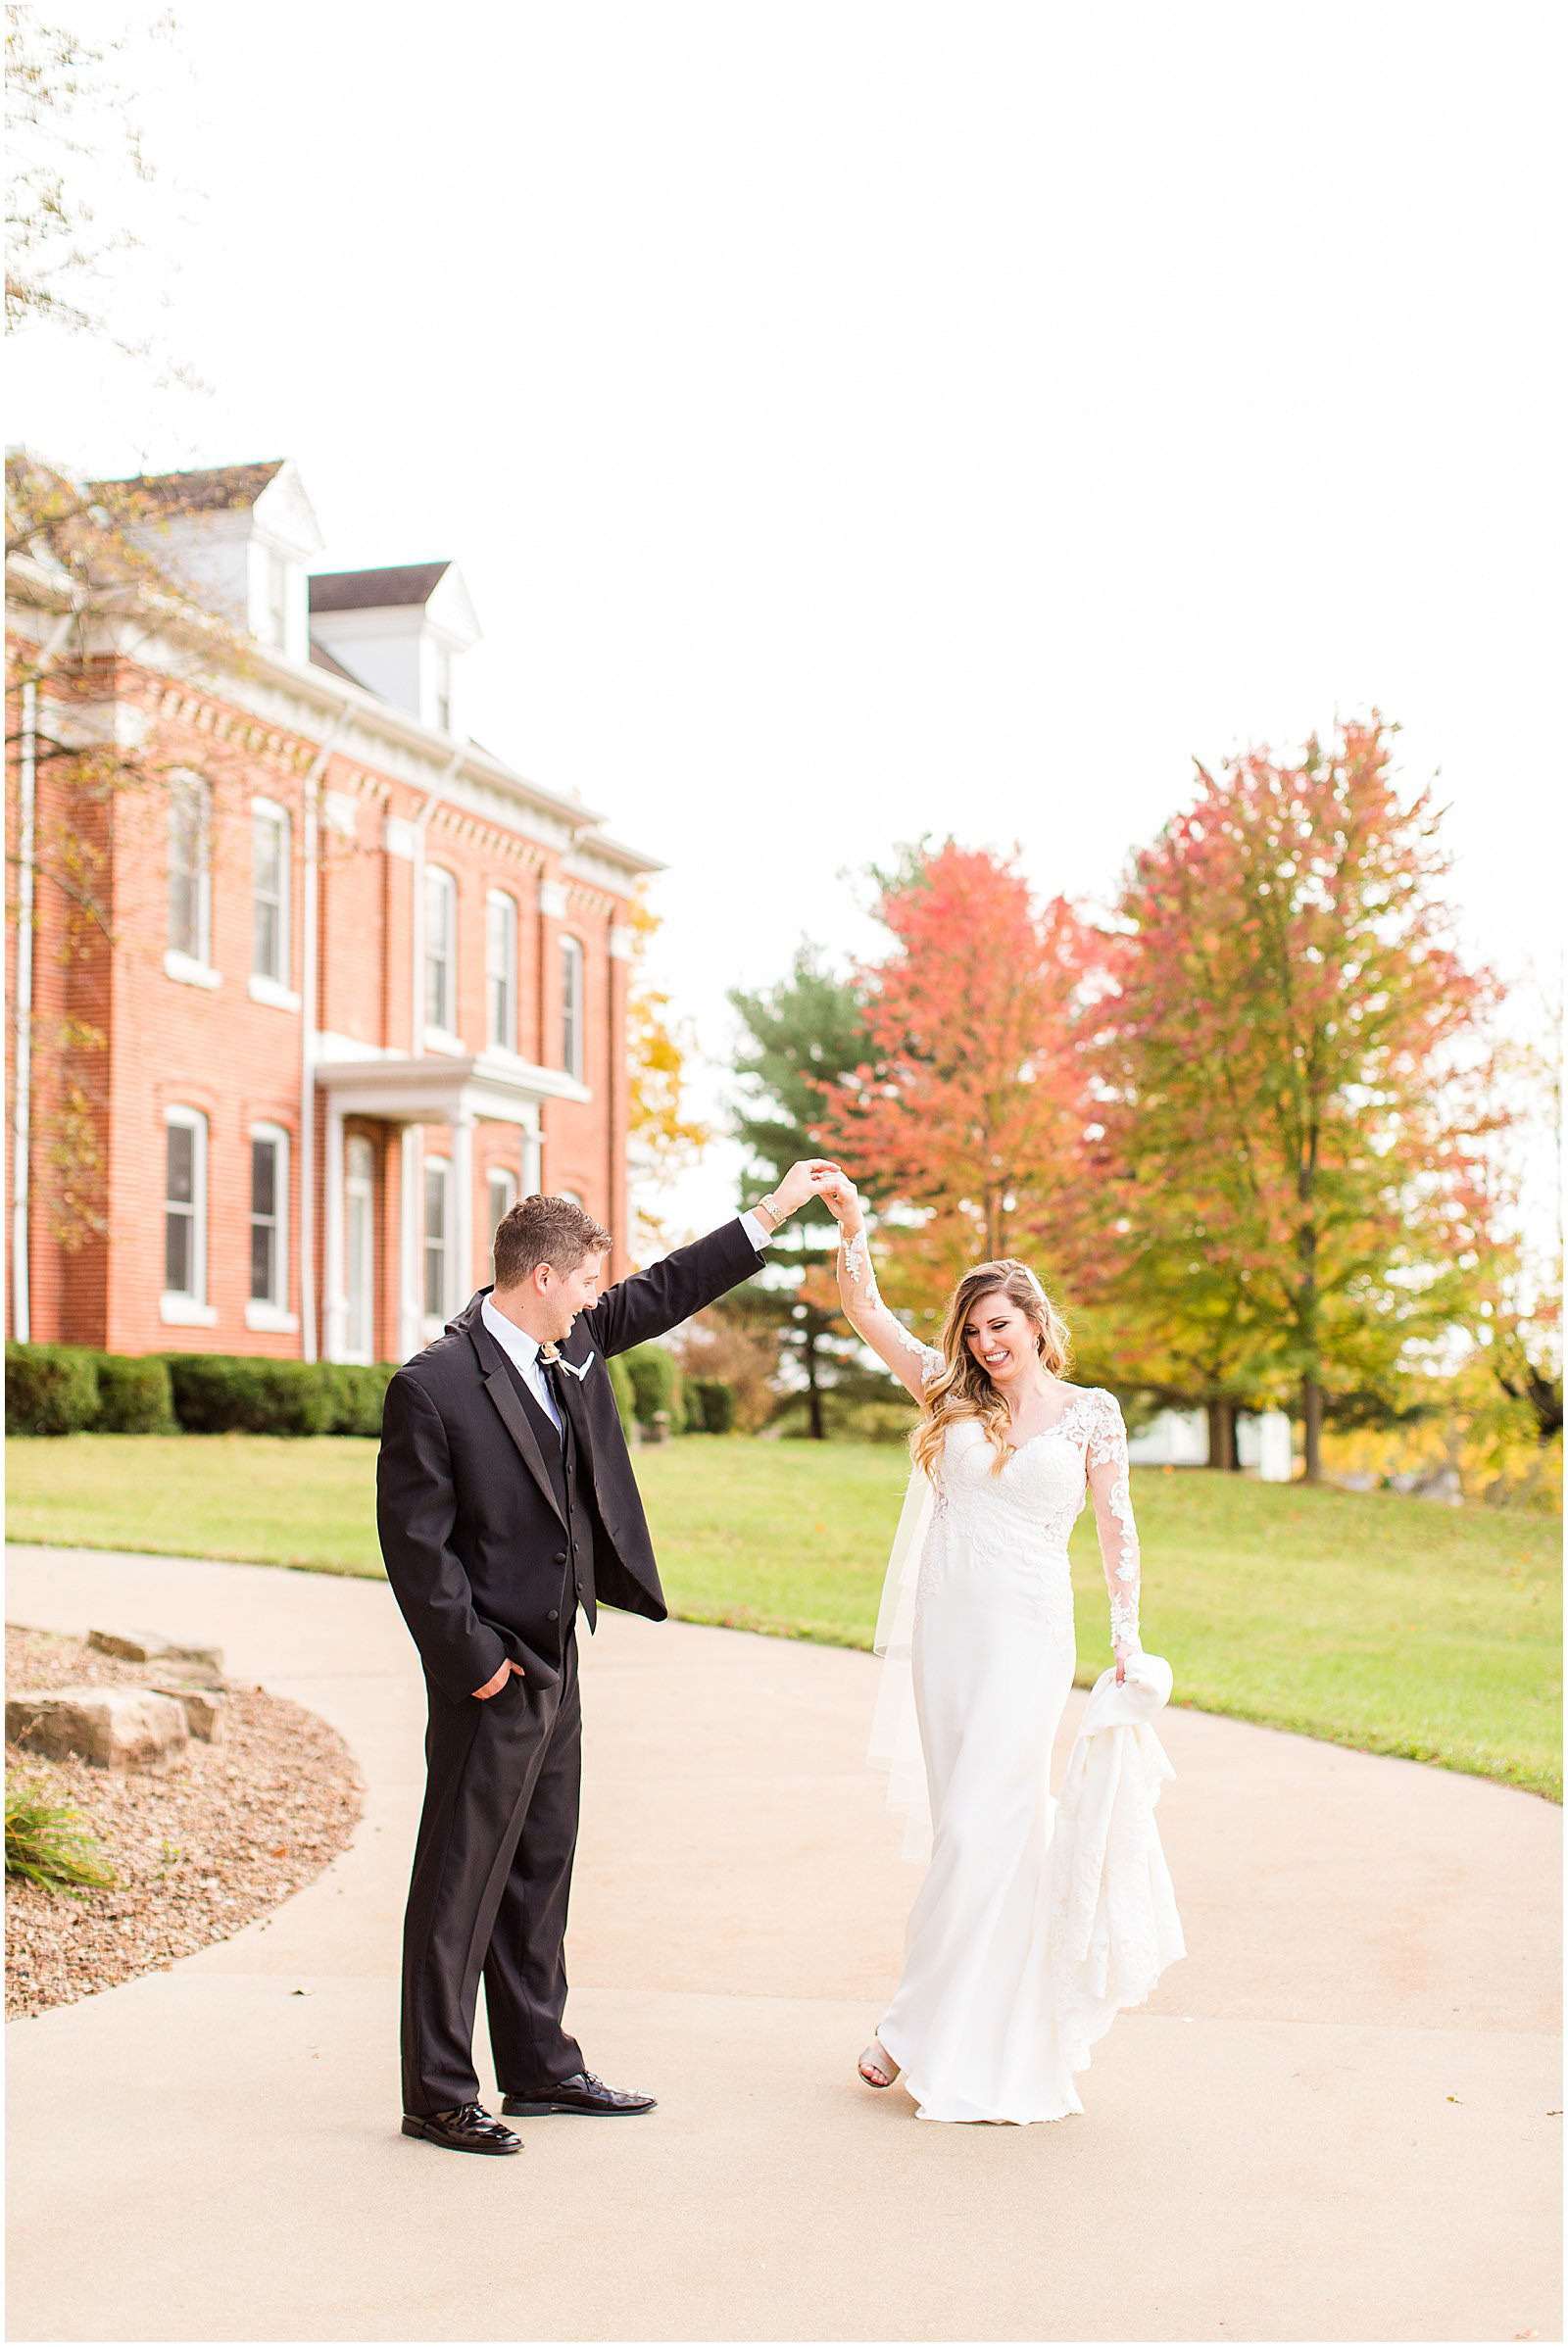 A Romantic Fall Wedding in Ferdinand, IN | Tori and Kyle | Bret and Brandie Photography 0120.jpg